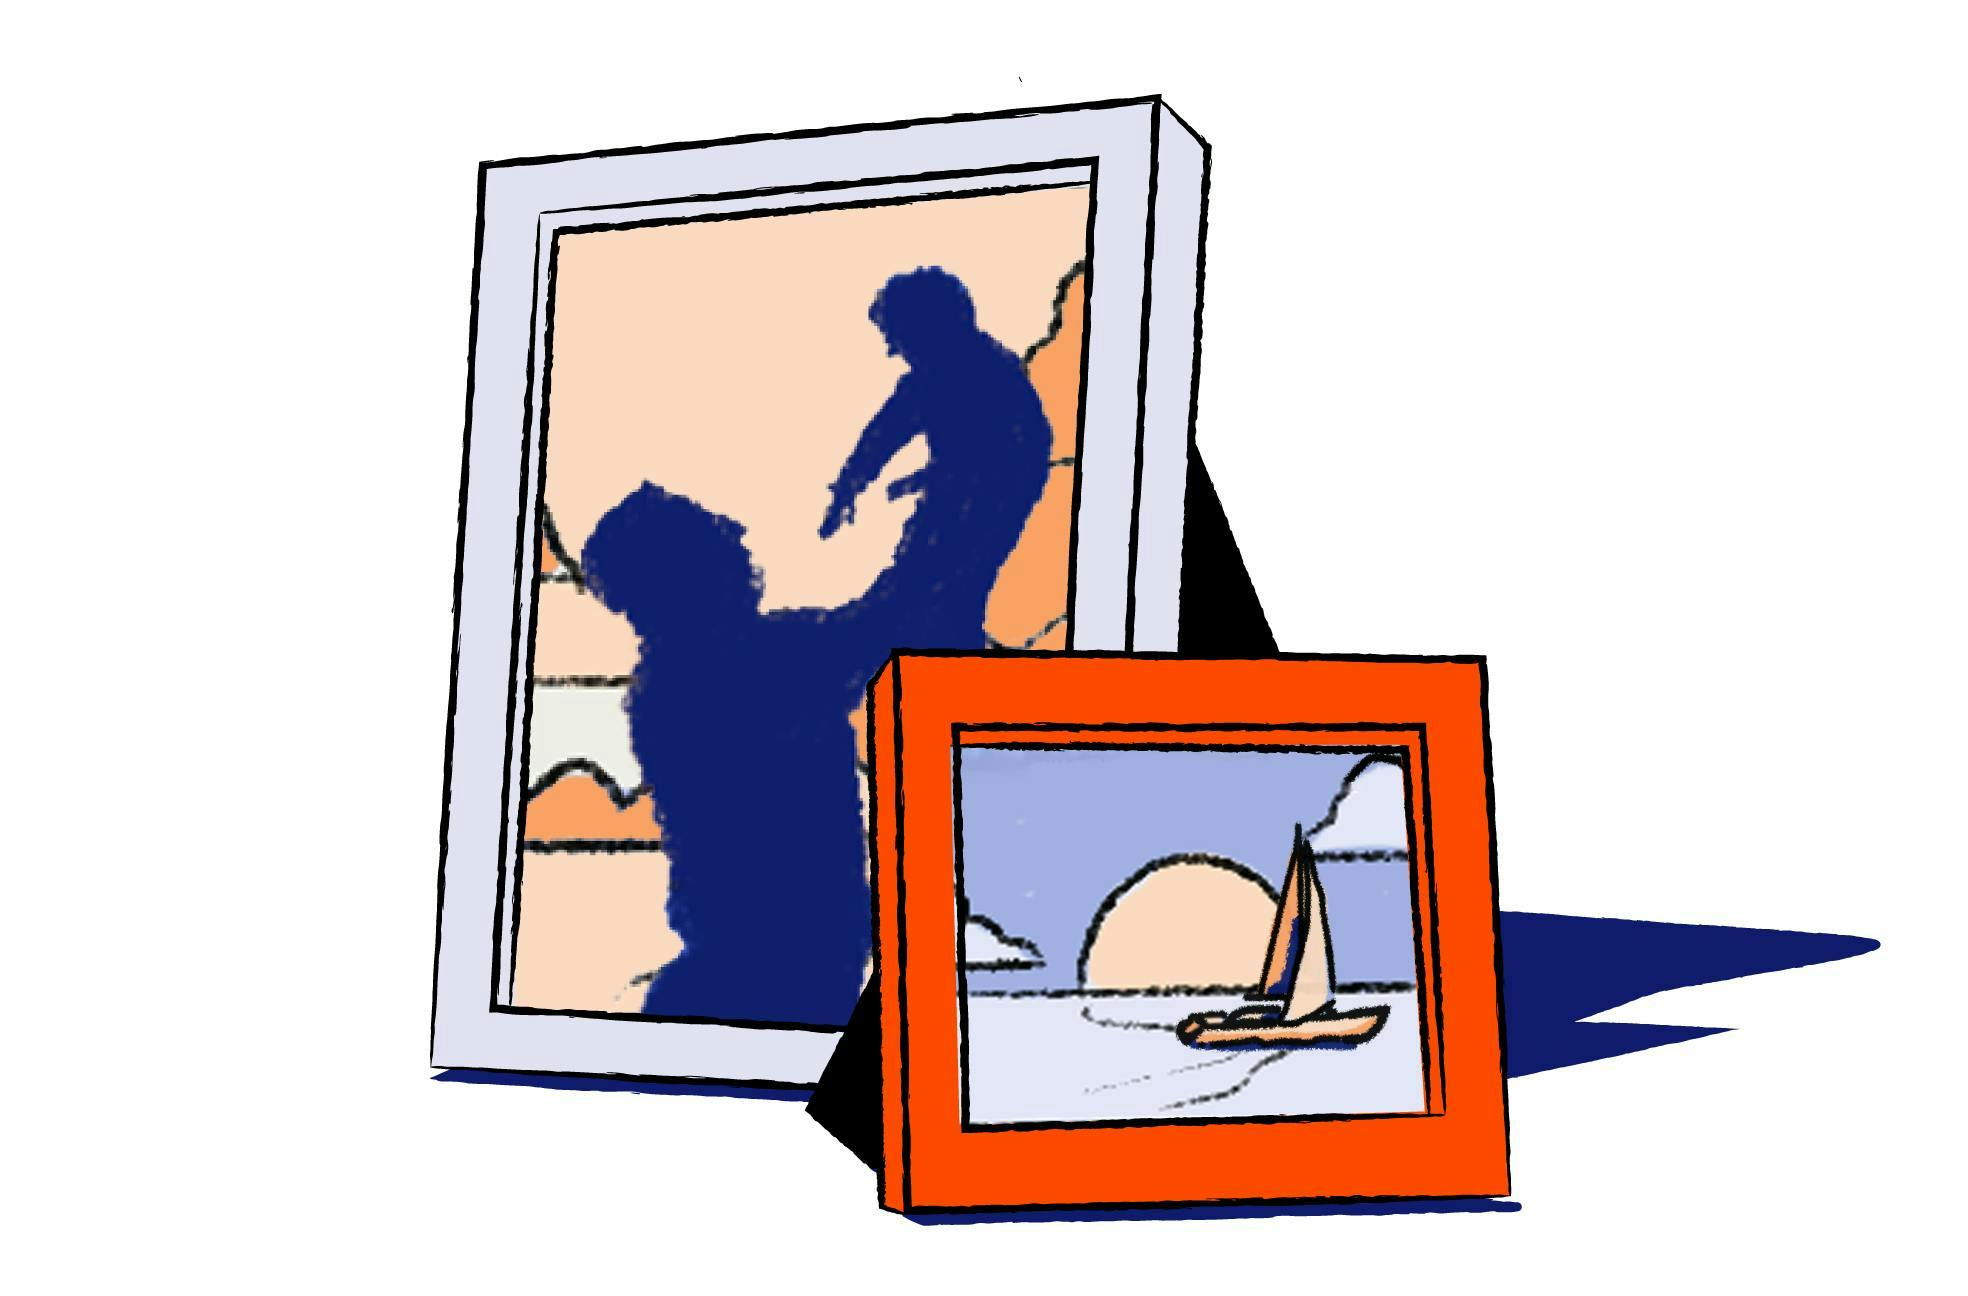 Framed photos grouped together showing a family and a sailboat at sunset.